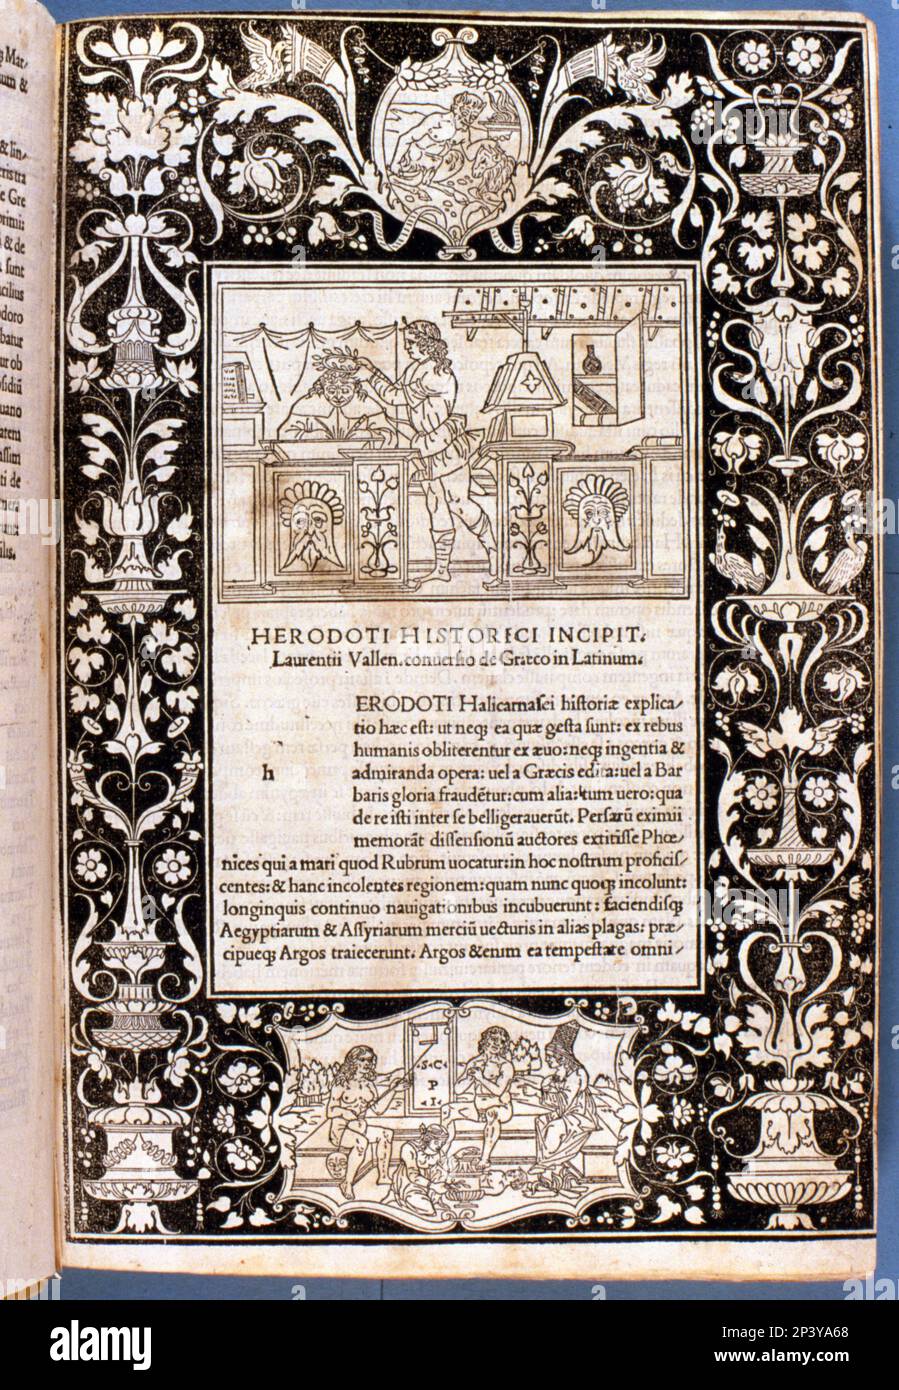 Cover of 'Herodoti historici incipit', 1494. Printed in Roman script in Venice by John and Gregory of Gregor&#xfc;s on March 8th 1494. Stock Photo